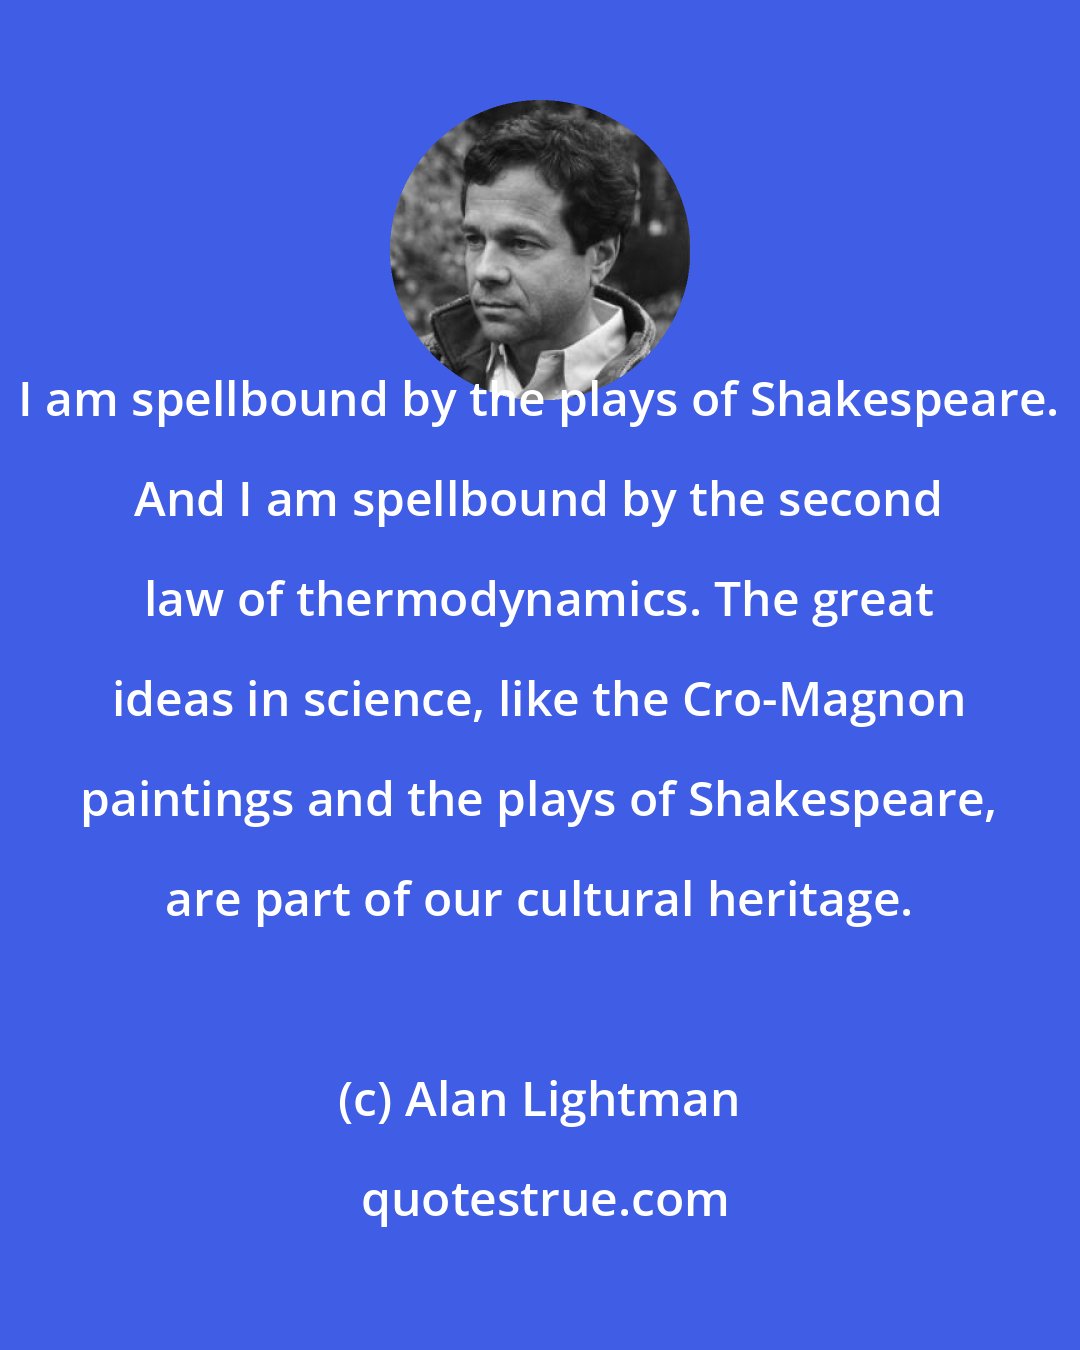 Alan Lightman: I am spellbound by the plays of Shakespeare. And I am spellbound by the second law of thermodynamics. The great ideas in science, like the Cro-Magnon paintings and the plays of Shakespeare, are part of our cultural heritage.